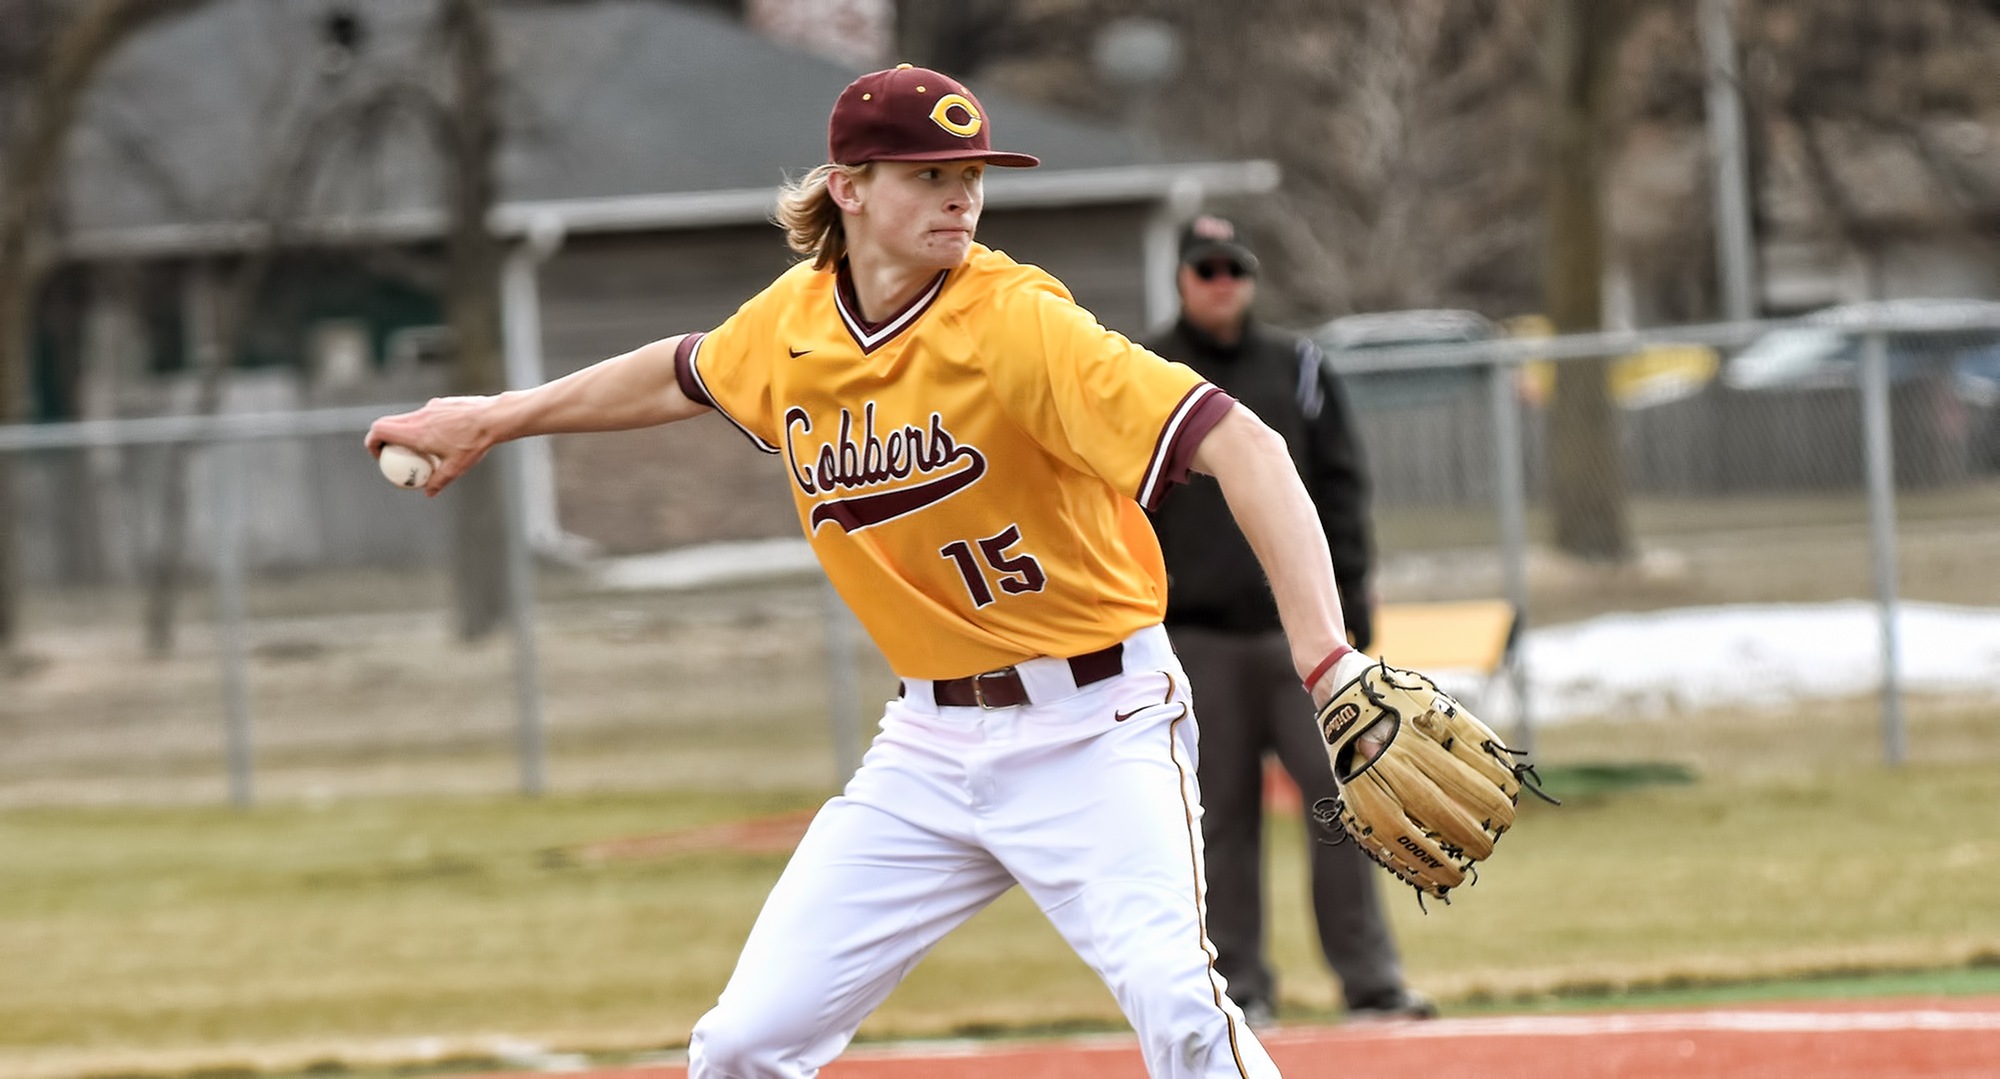 Senior Ty Syverson recorded a complete-game win and only allowed one run and four hits in the Cobbers' 4-1 win over Pitt.-Greensburg.